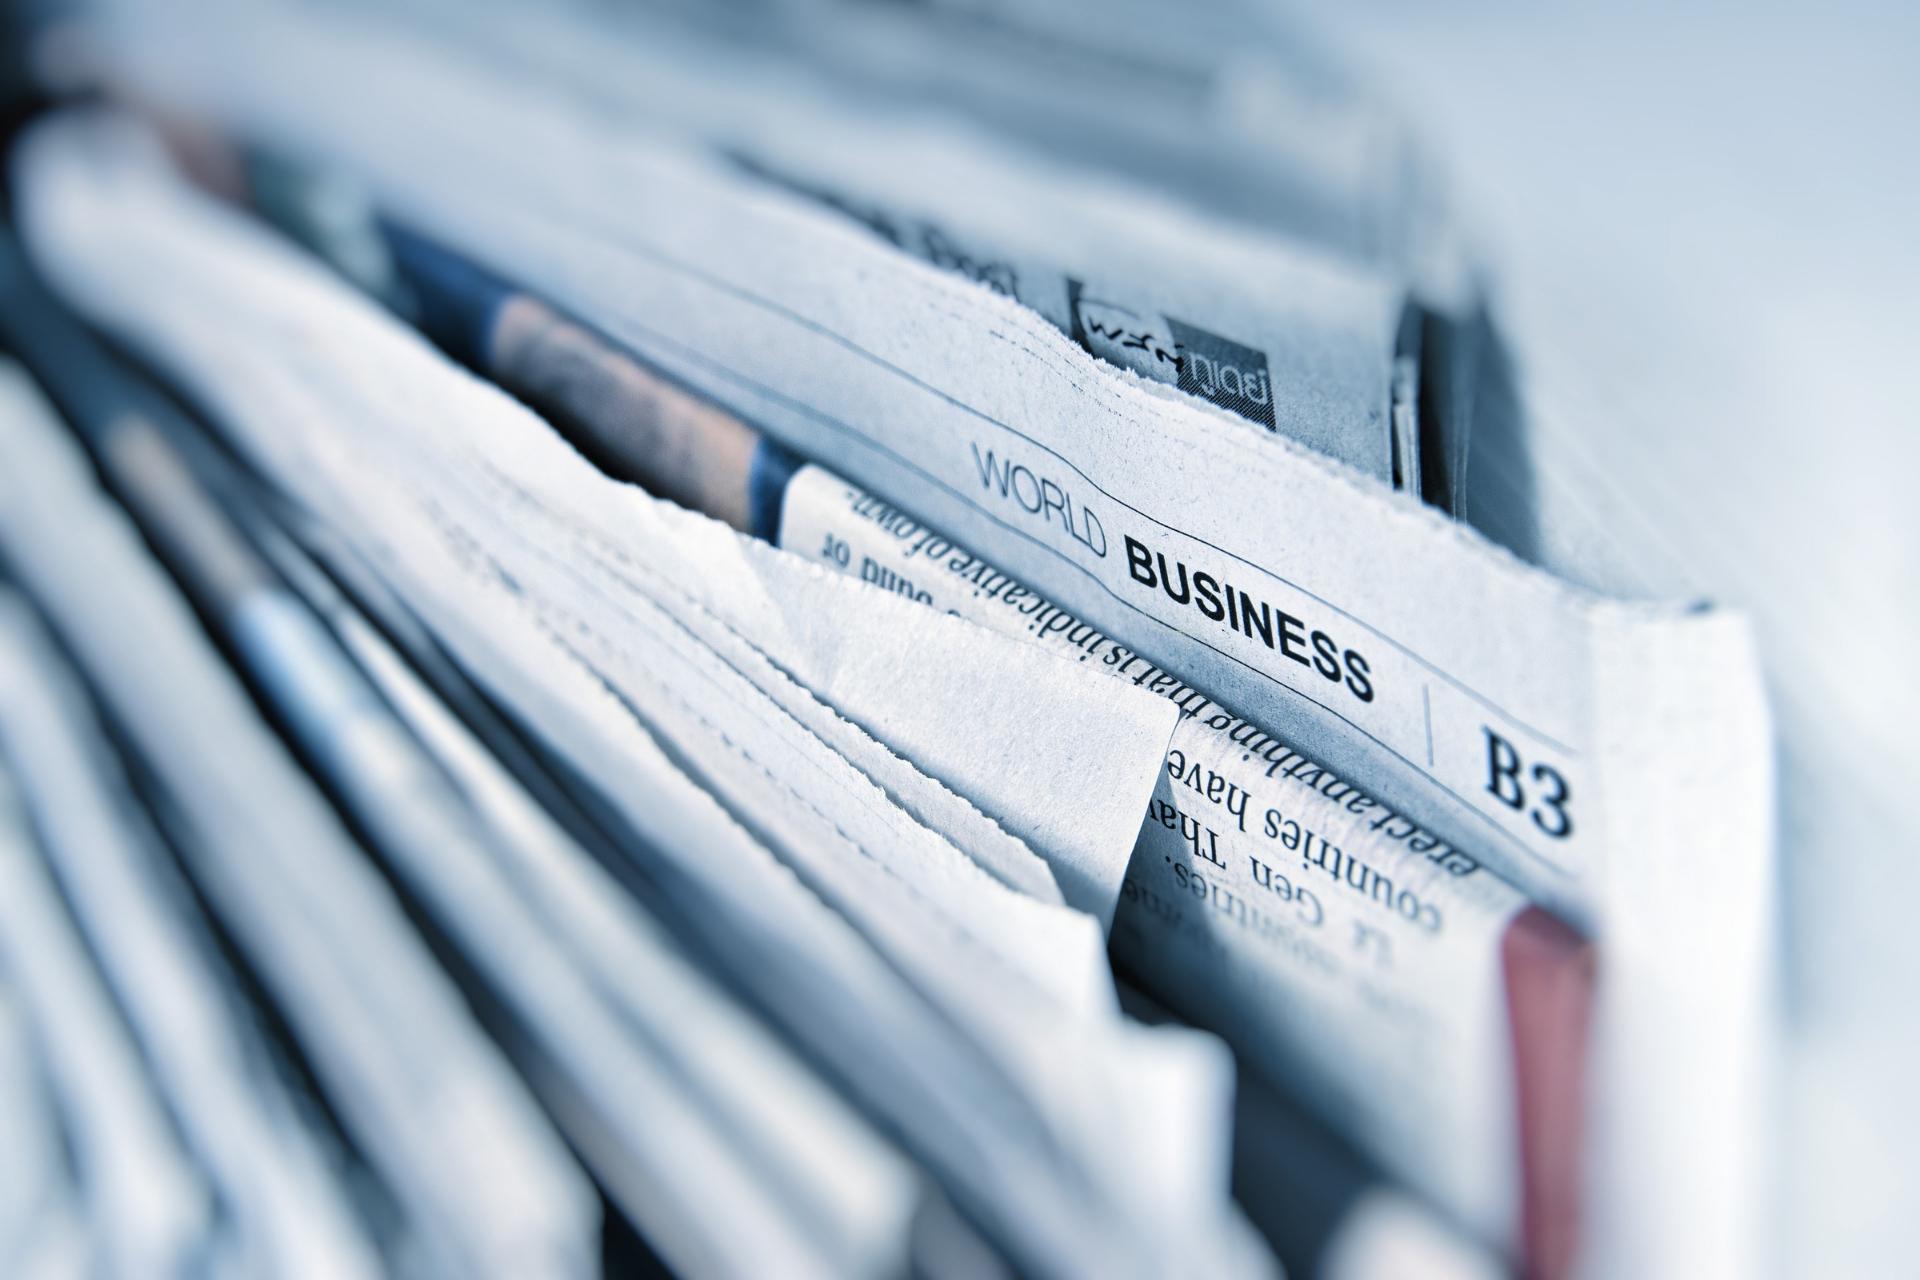 Folded newspaper highlighting world business section